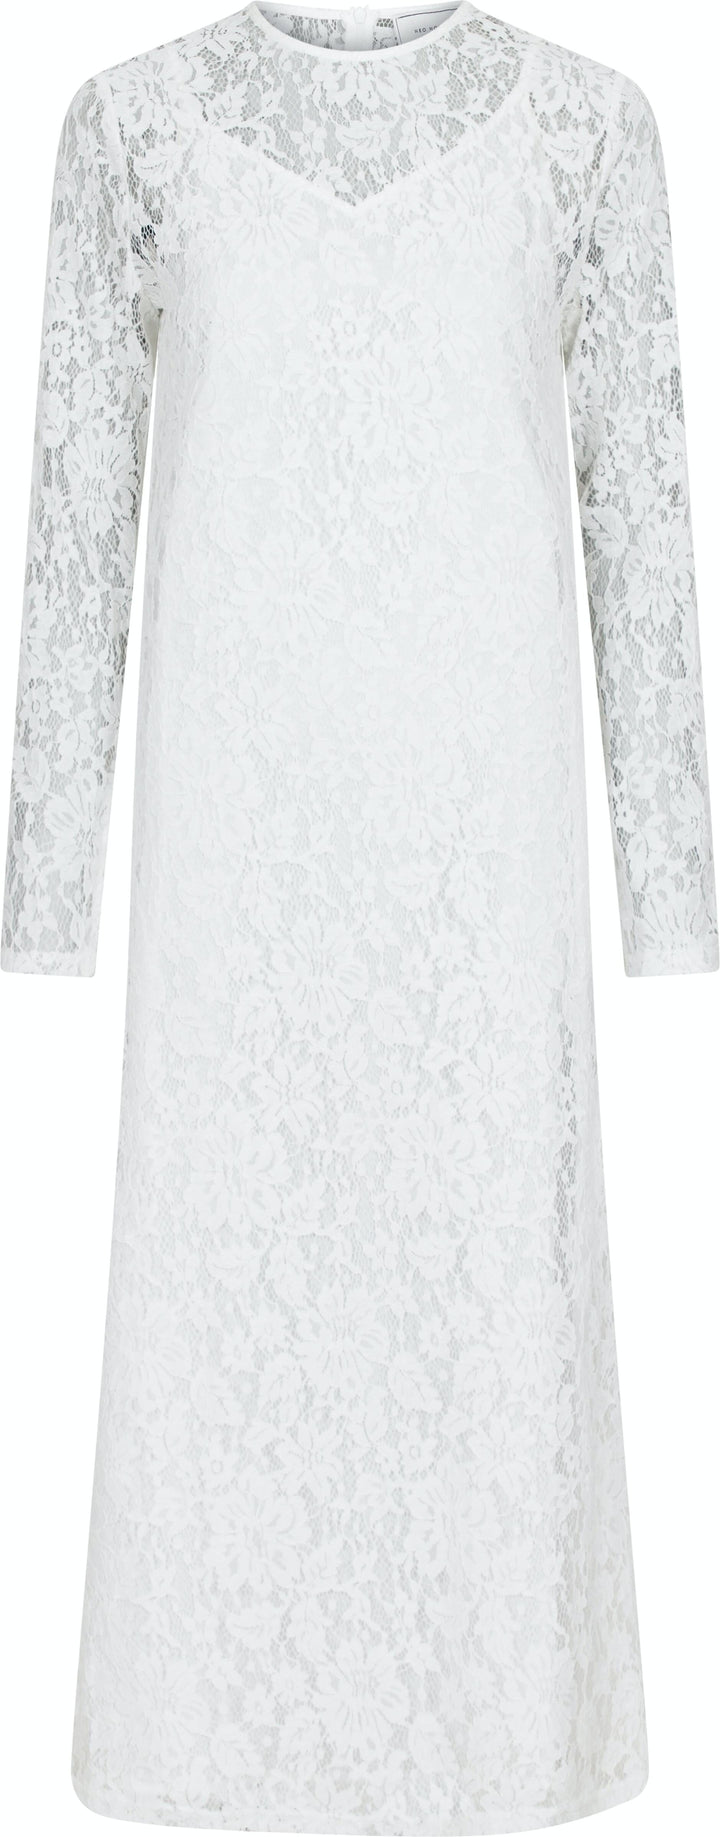 Neo Noir - Mary Lace Dress - White